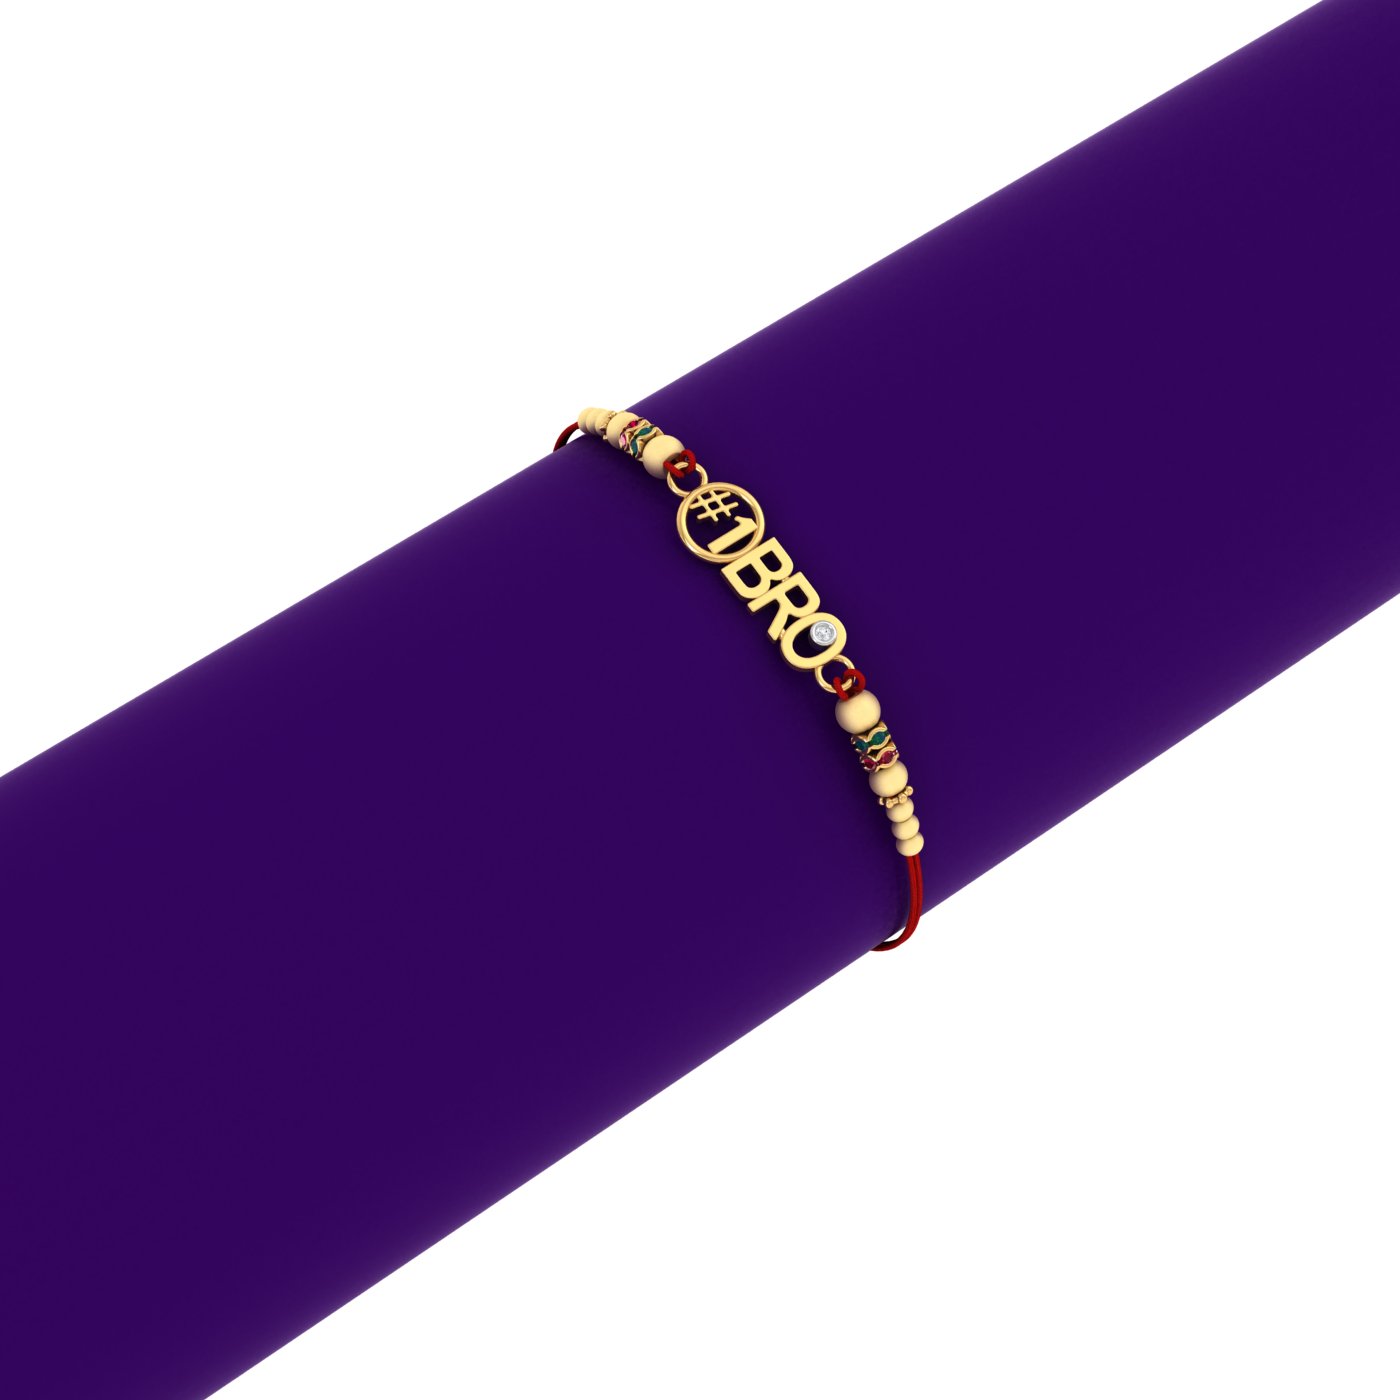 Get Your Hands on the Latest Rakhi Design for Younger Brother | COOL BRO GOLD RAKHI